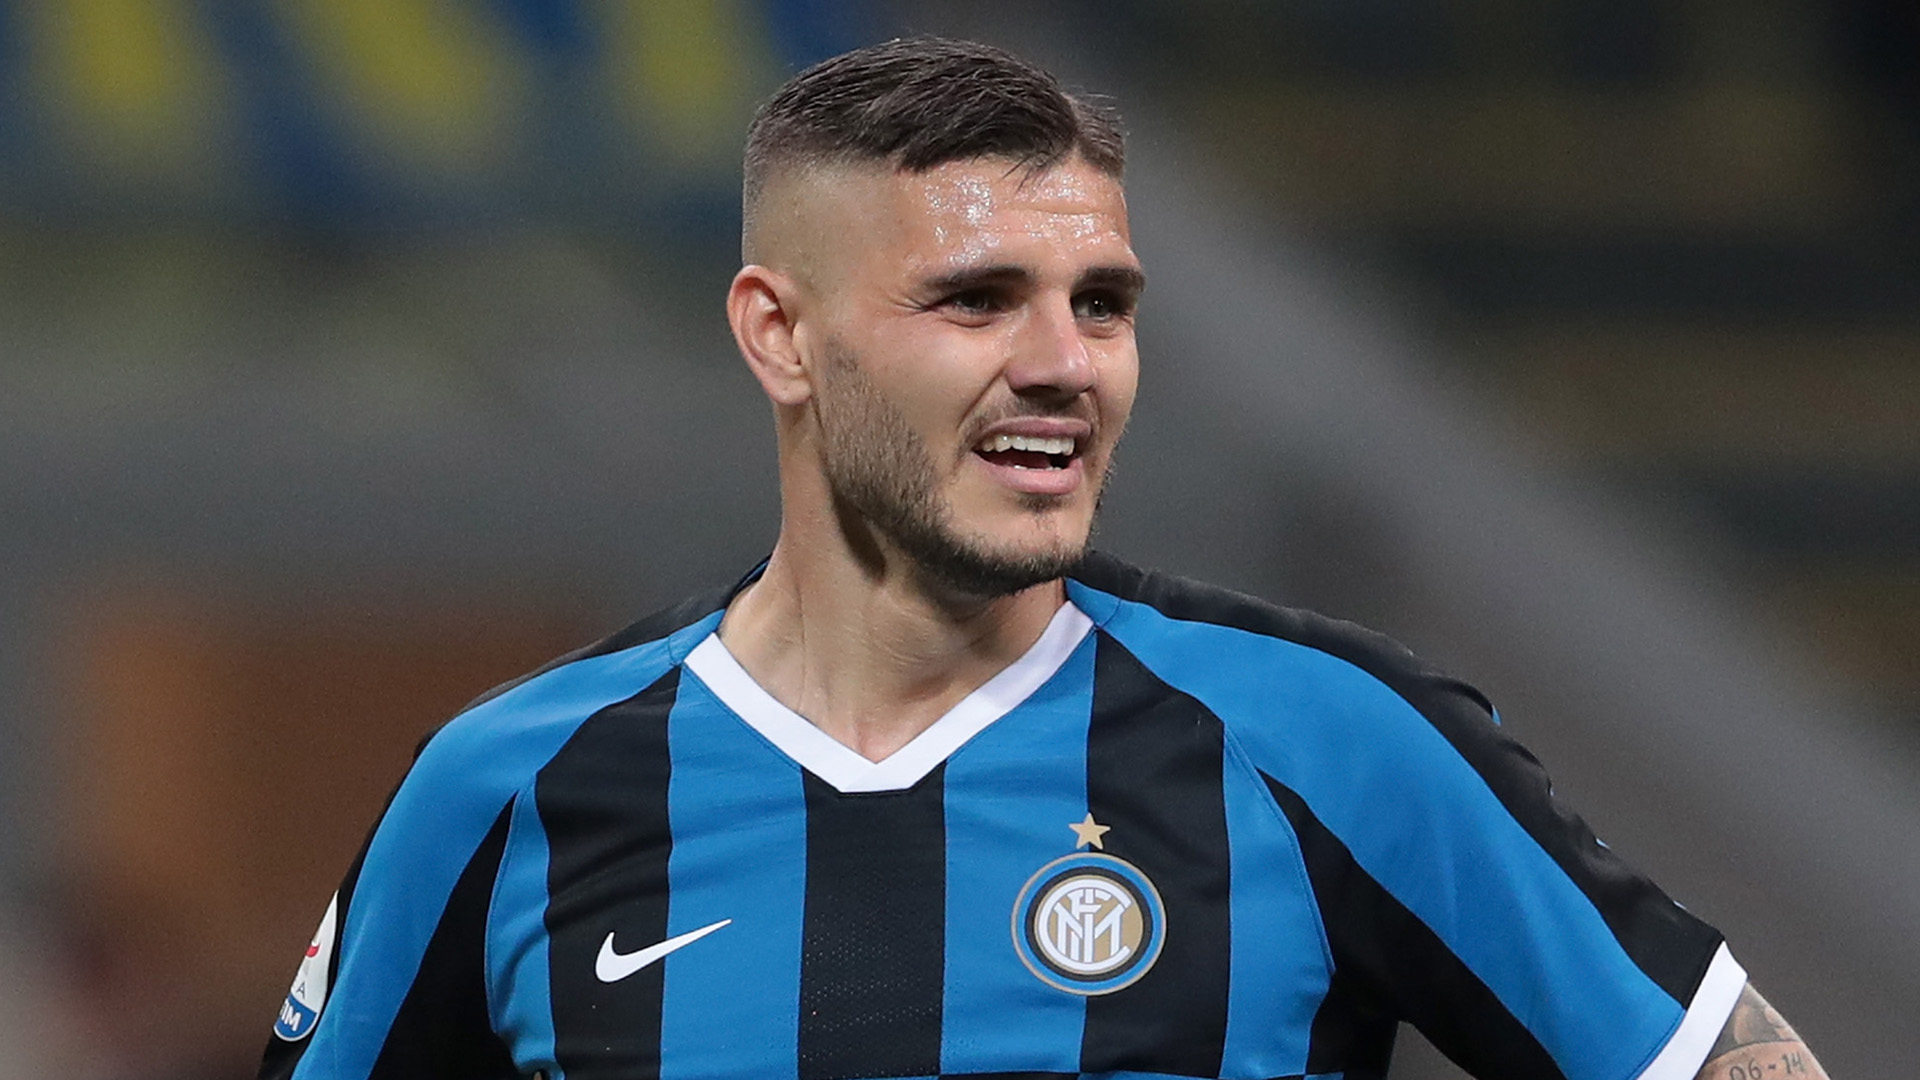 Mauro ICARDI left out of Inter summer tour, will be sold